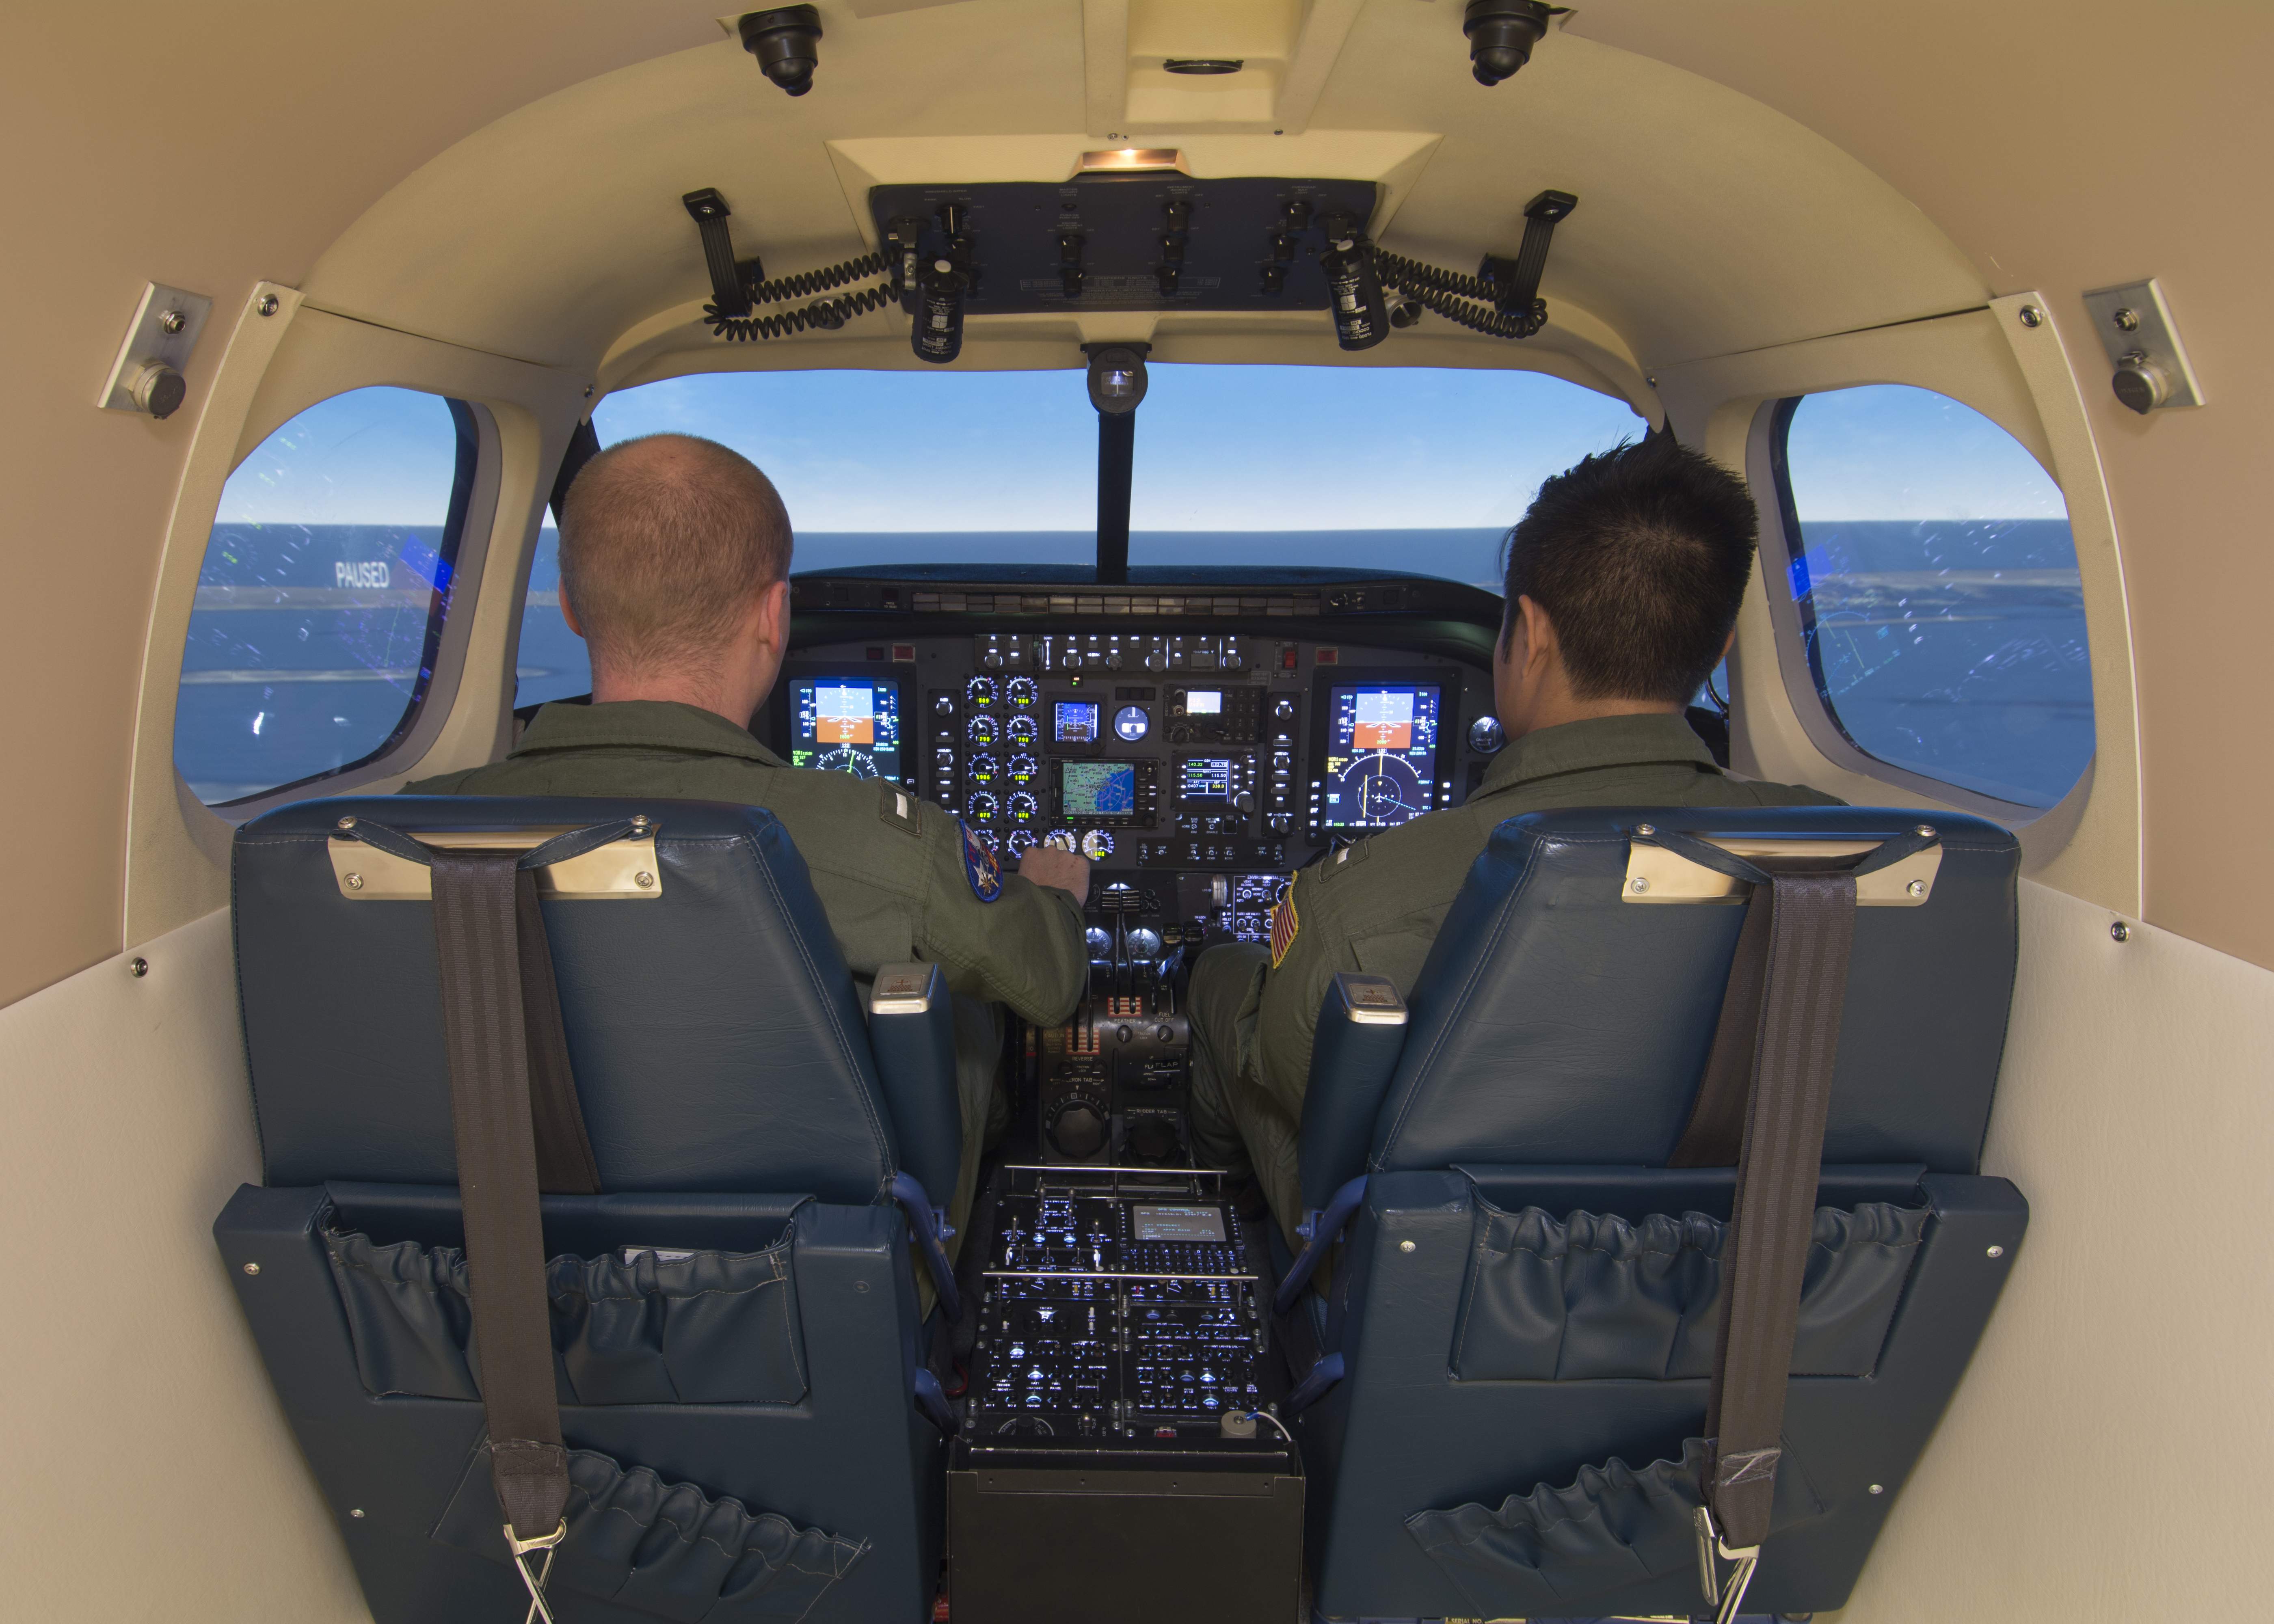 CAE begins delivery of new T-44C flight training devices to U.S. Navy